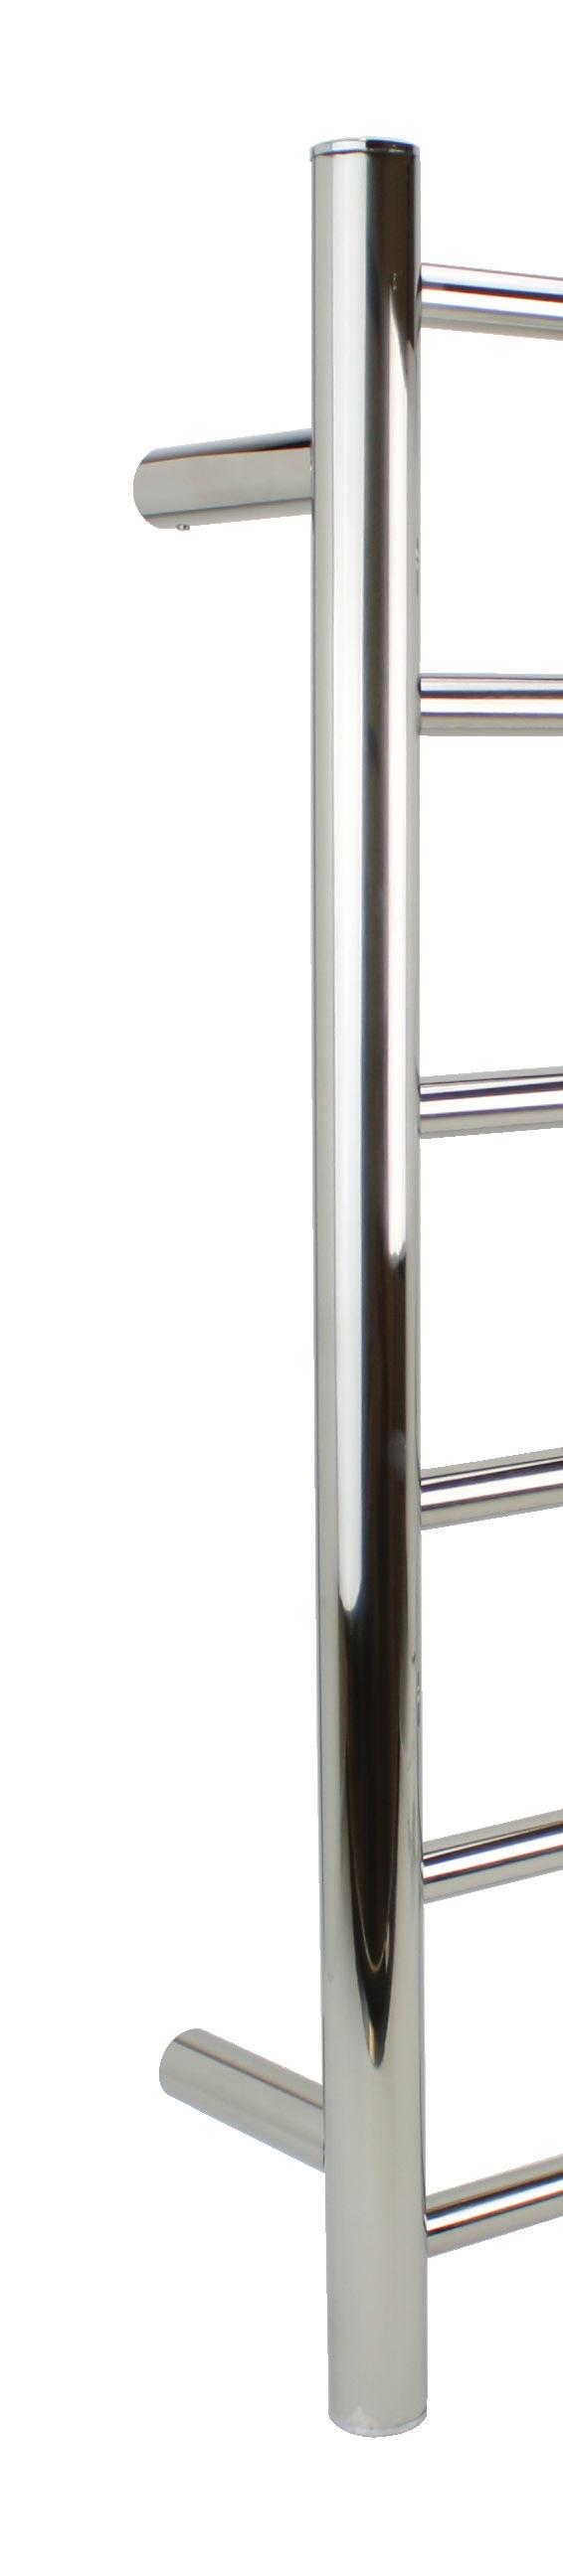 The Studio The Studio Towel Warmer features a minimalistic design and a polished and brushed stainless steel finish, enabling it to complement any bathroom décor.